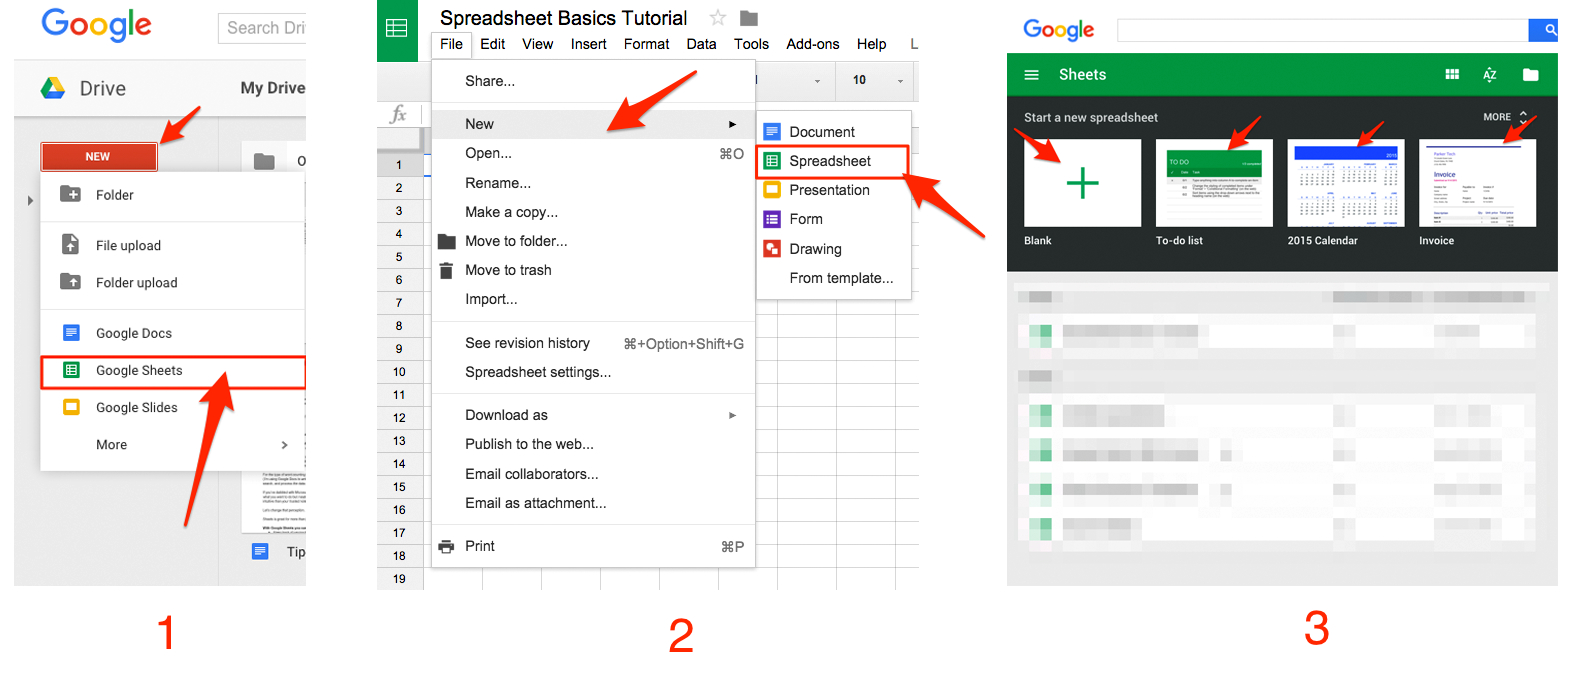 Online Excel Spreadsheet With Google Sheets 101: The Beginner's Guide To Online Spreadsheets  The